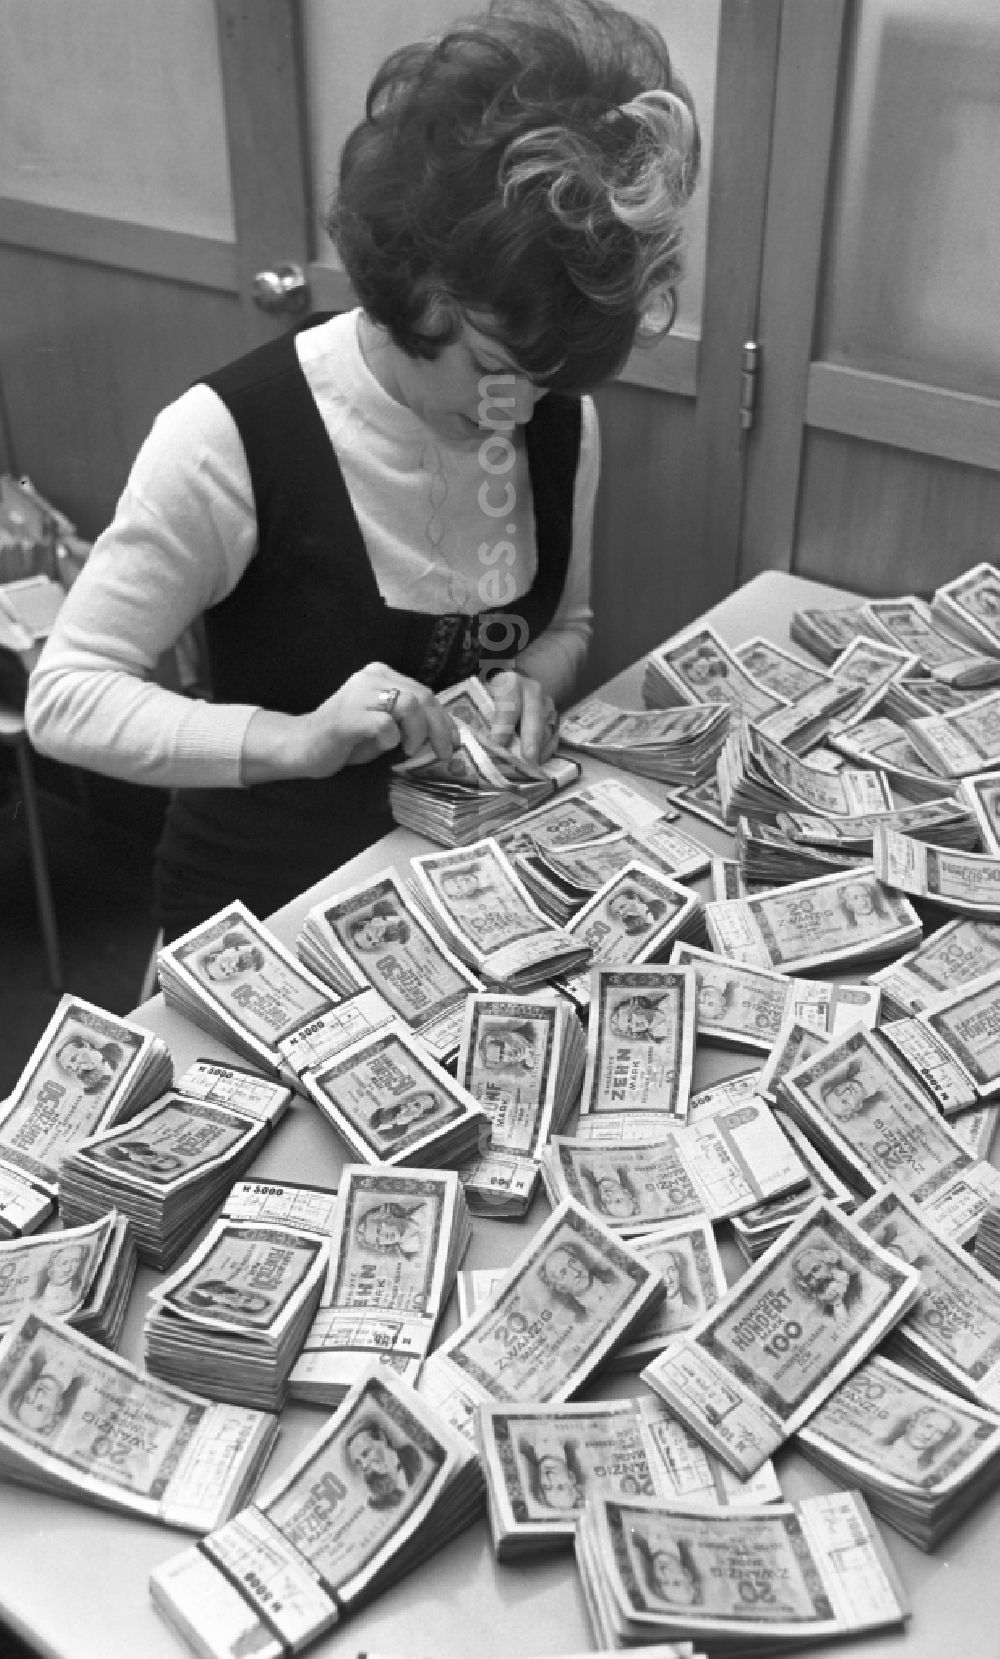 Berlin: Various mark banknotes in stacks on the table of a bank employee as legal tender and currency put into circulation by the state bank in the Mitte district of Berlin, East Berlin in the territory of the former GDR, German Democratic Republic